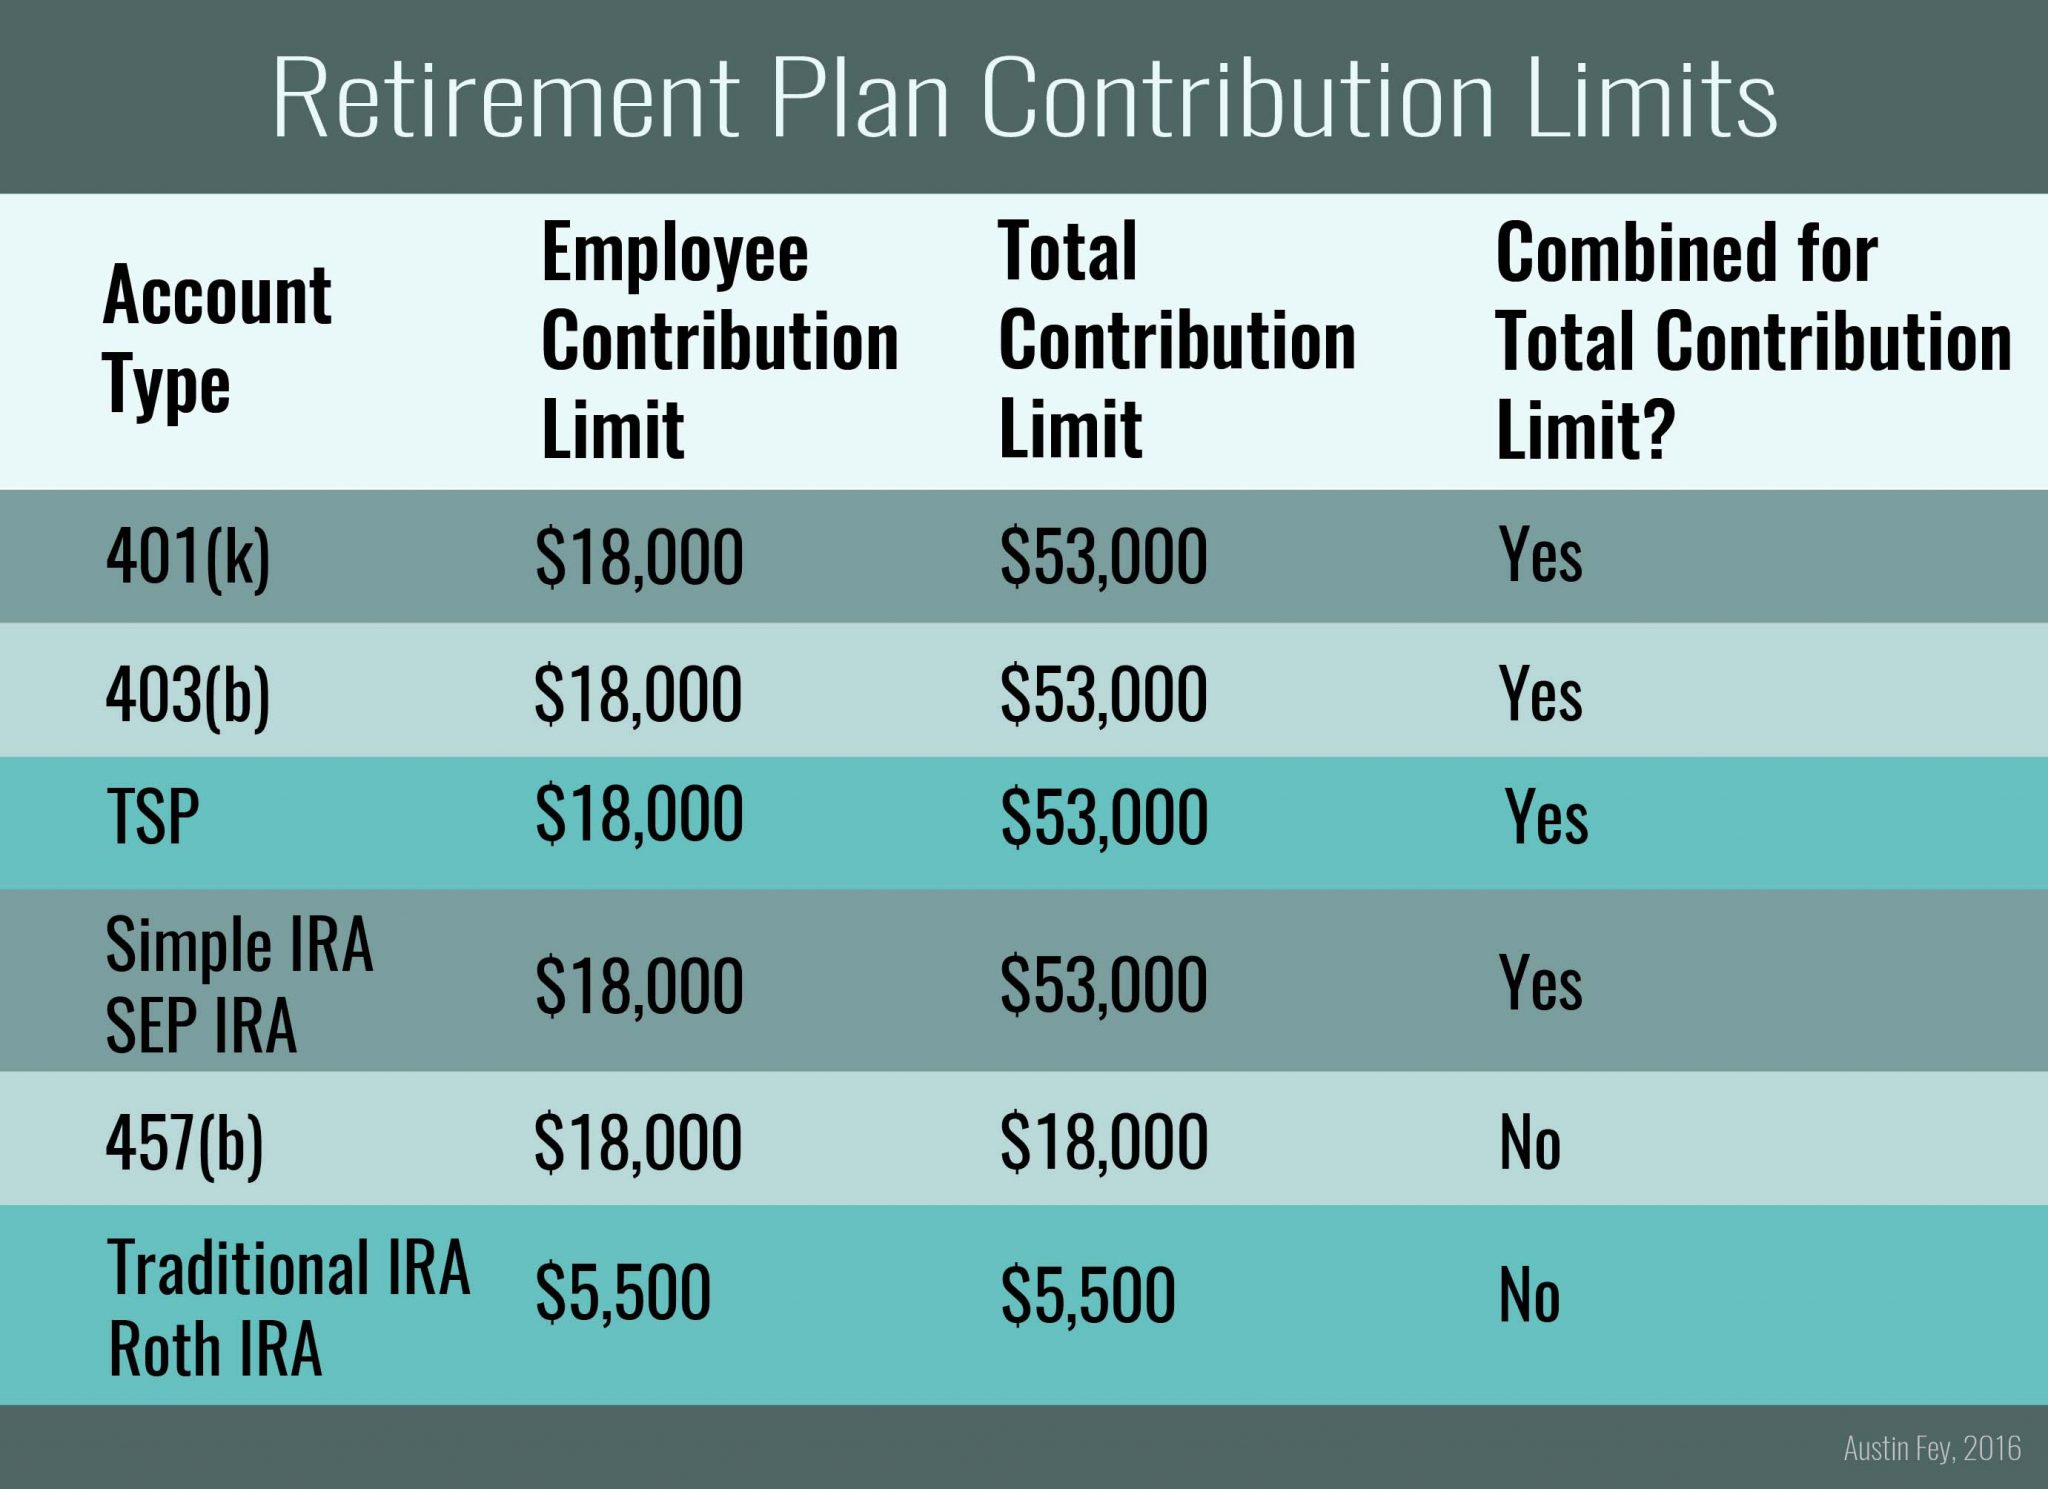 best retirement plan for small law firm